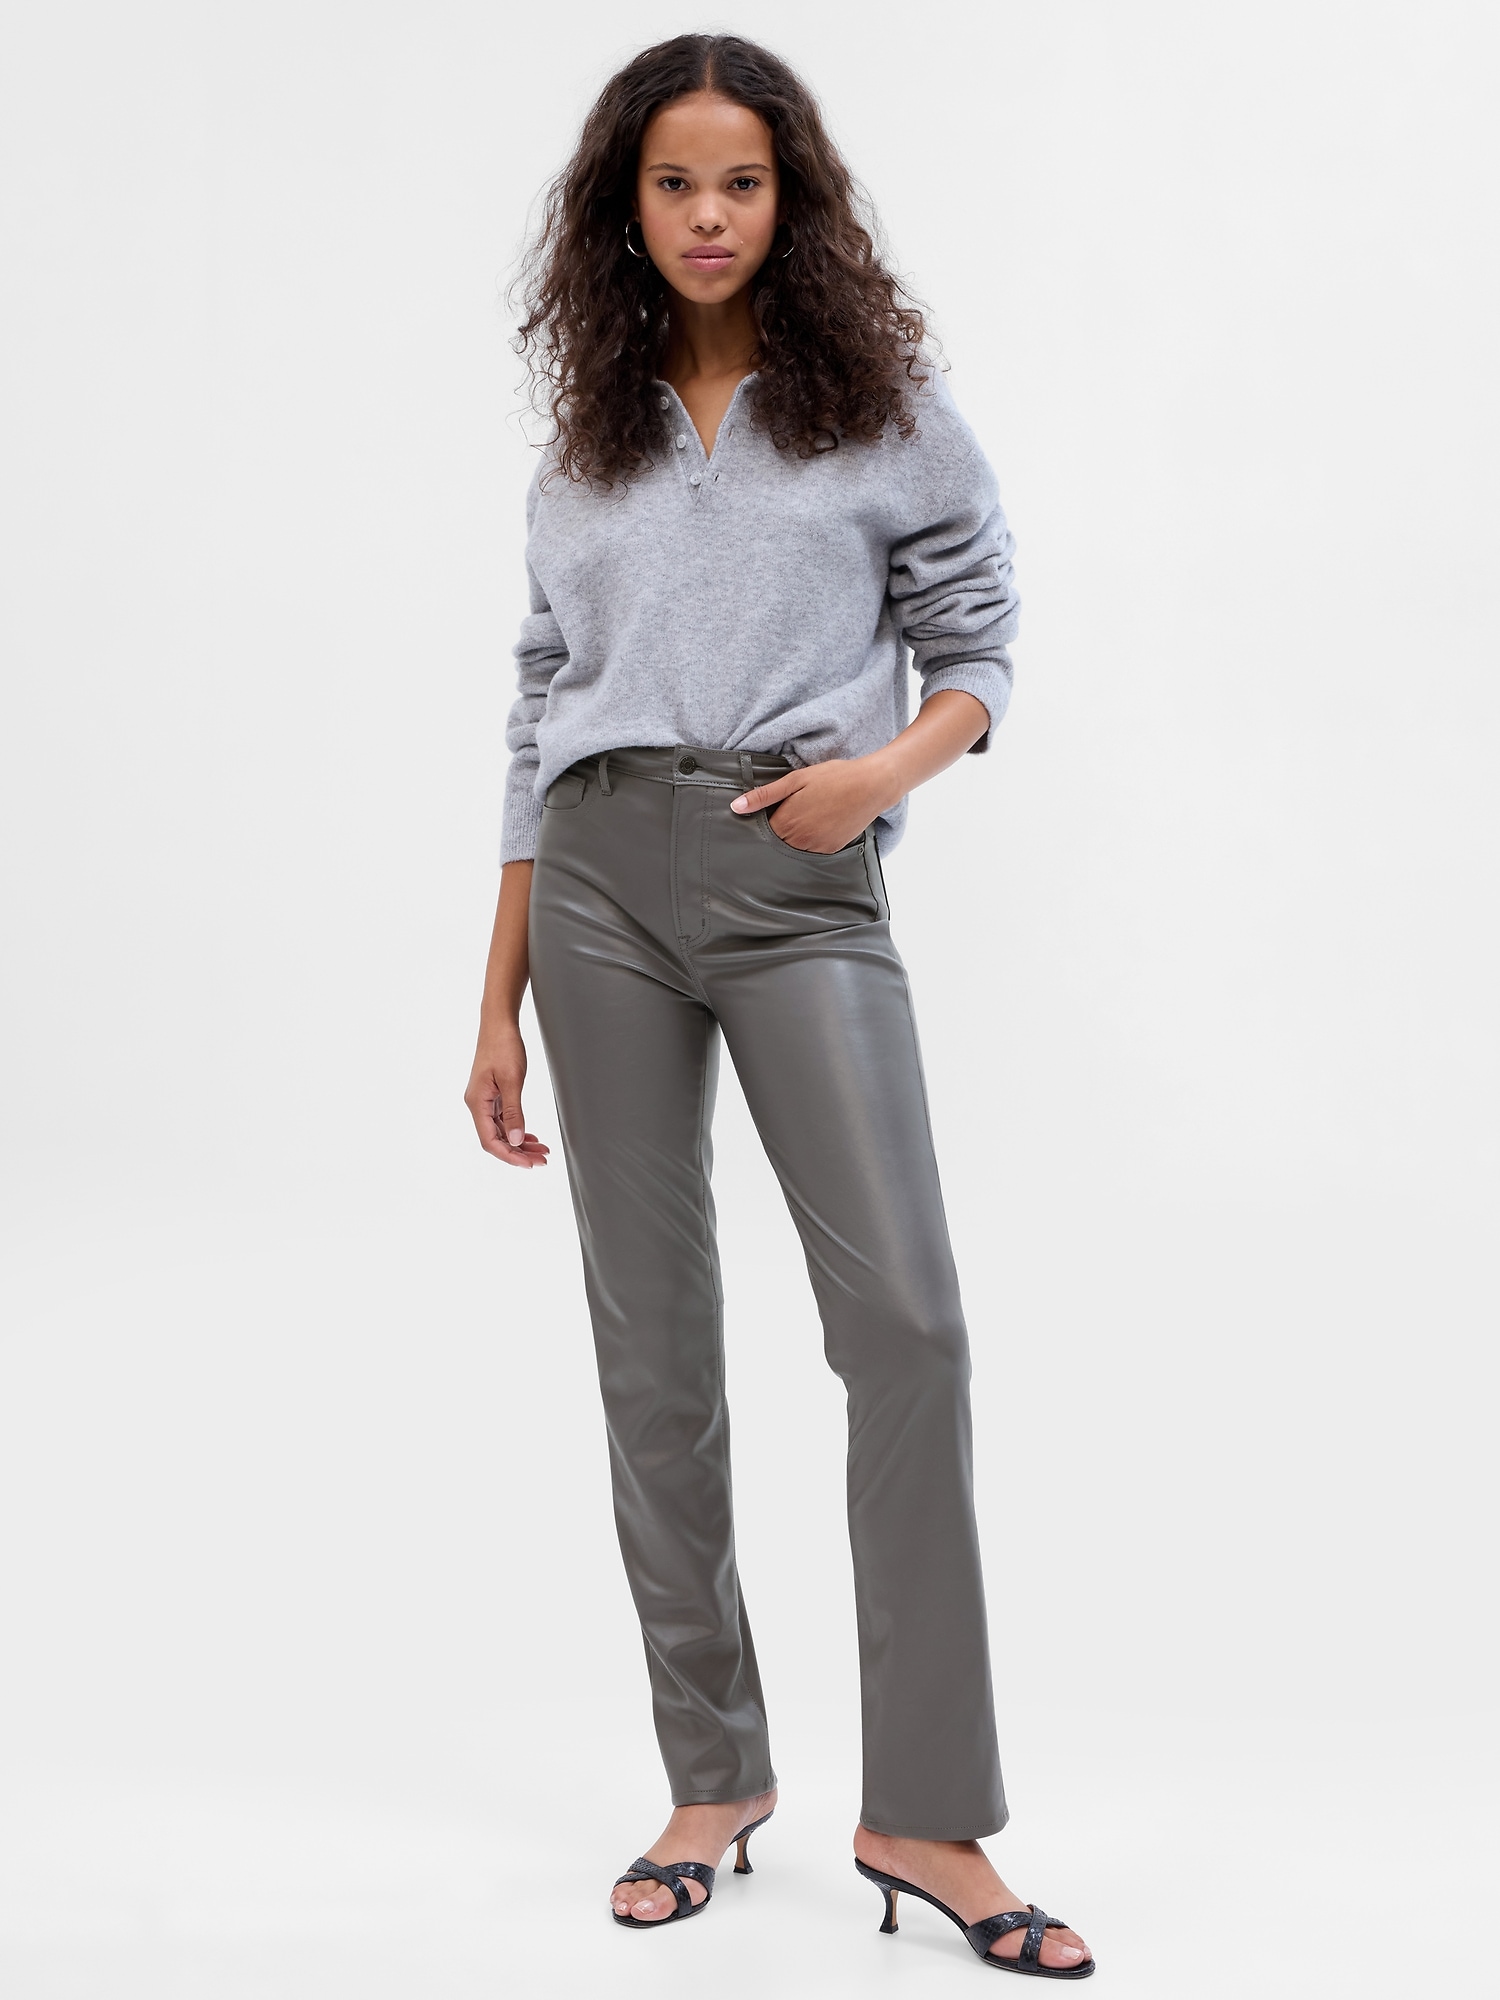 Women's High-Rise Slim Fit Ankle Pants - A New Day Gray 8